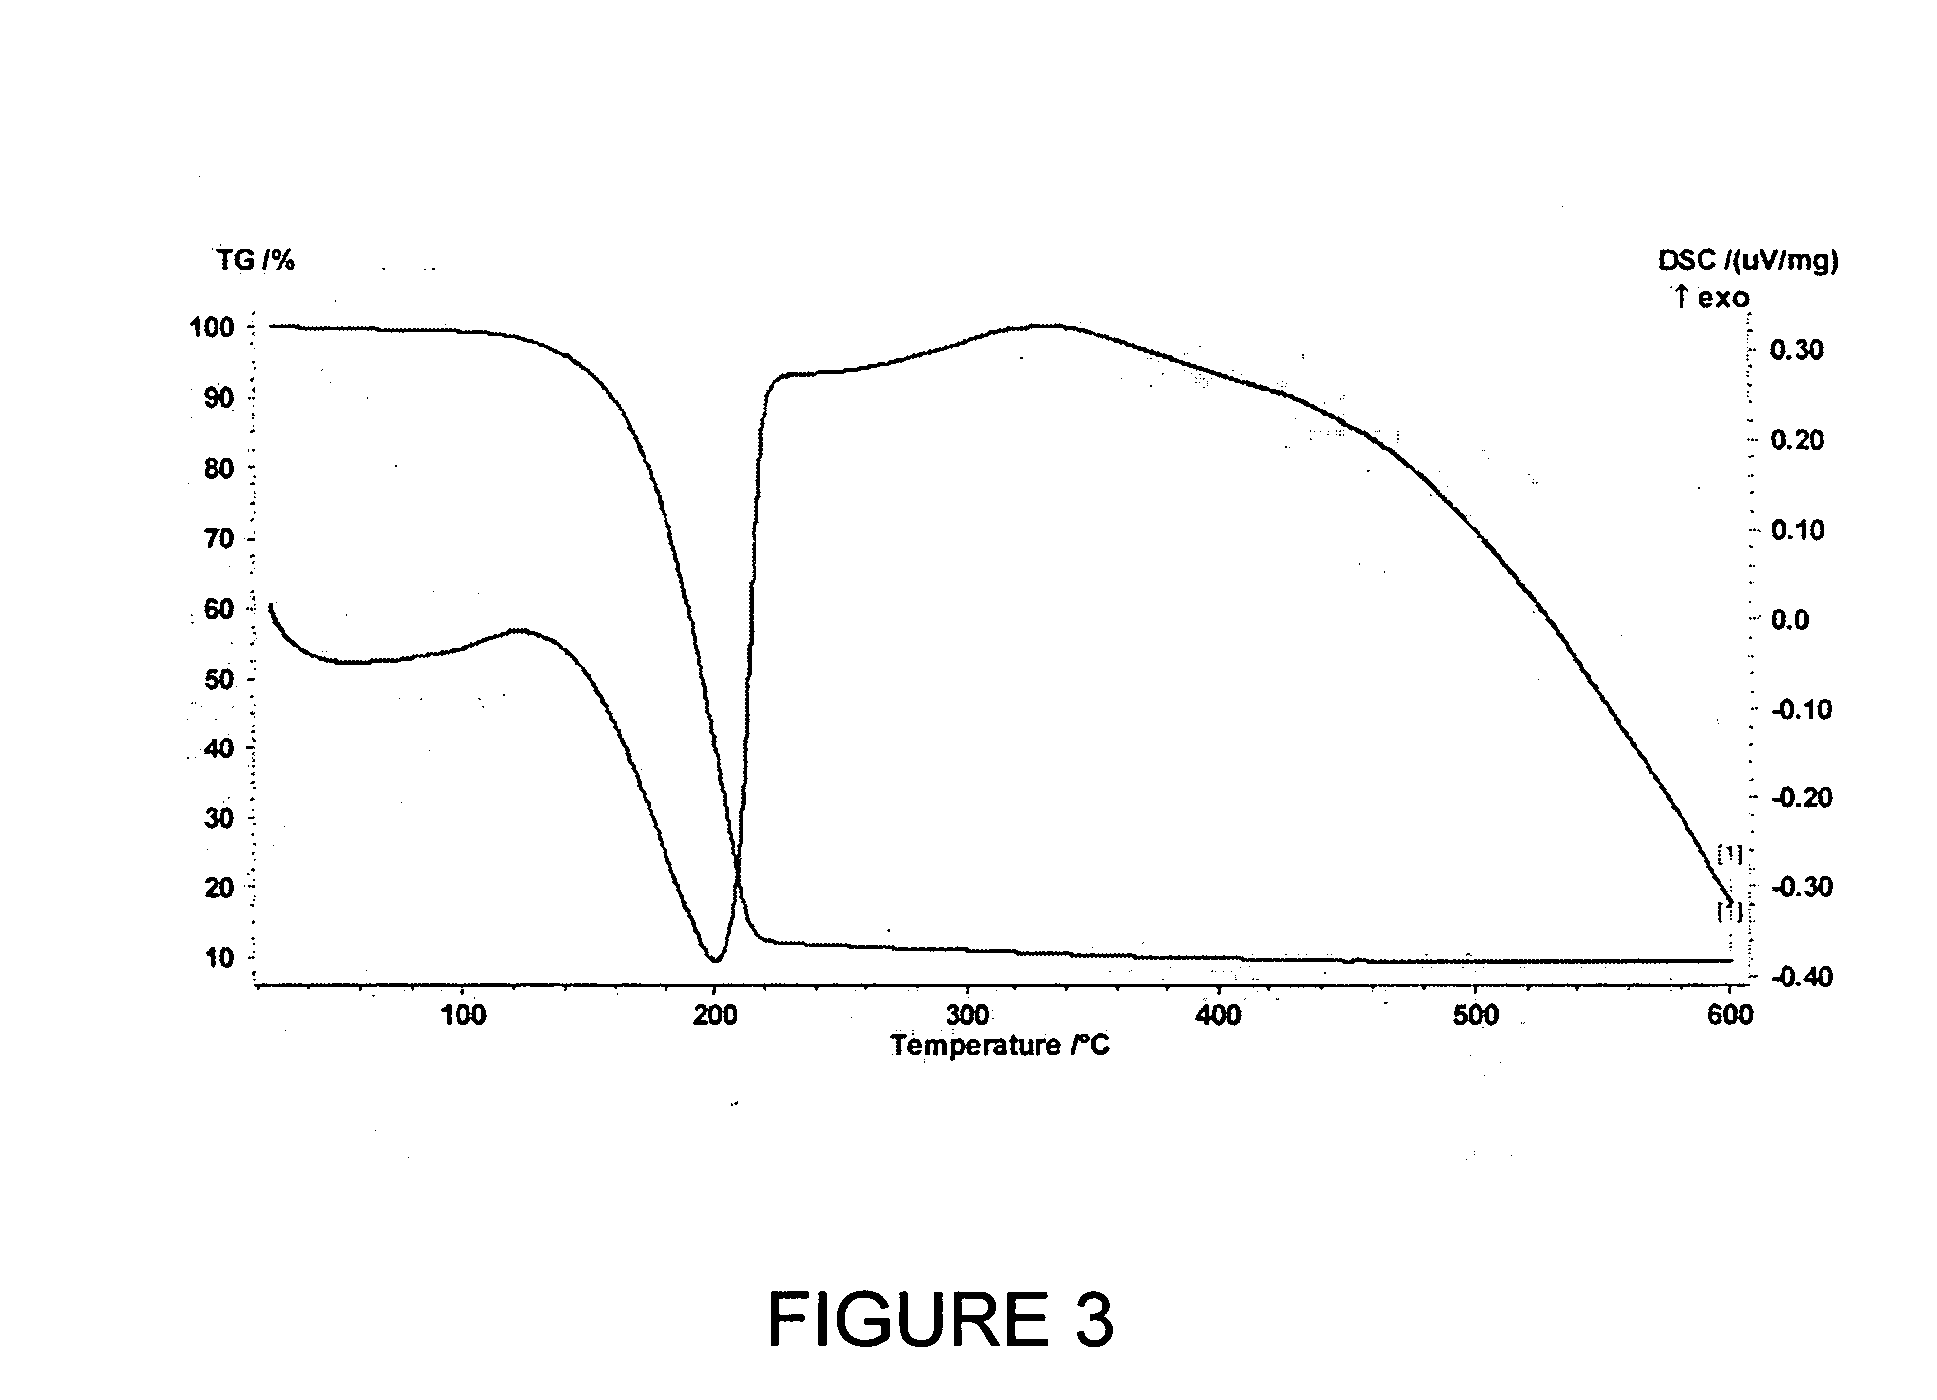 Tantalum amide complexes for depositing tantalum-containing films, and method of making same